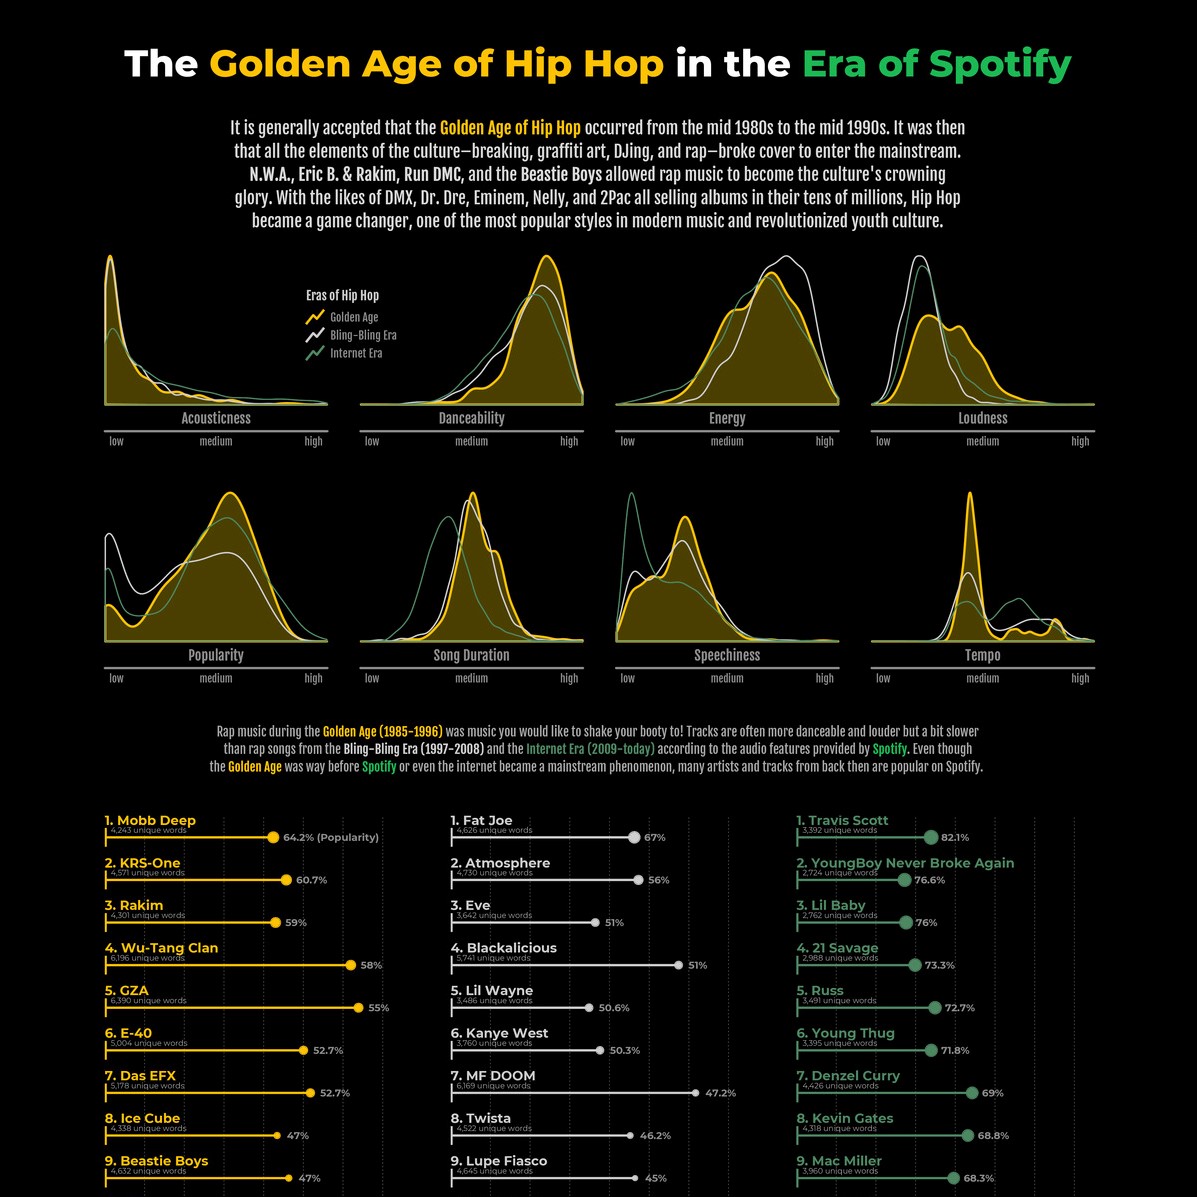 TidyTuesday Week 2020 04 Spotify Songs Golden Age of HipHop